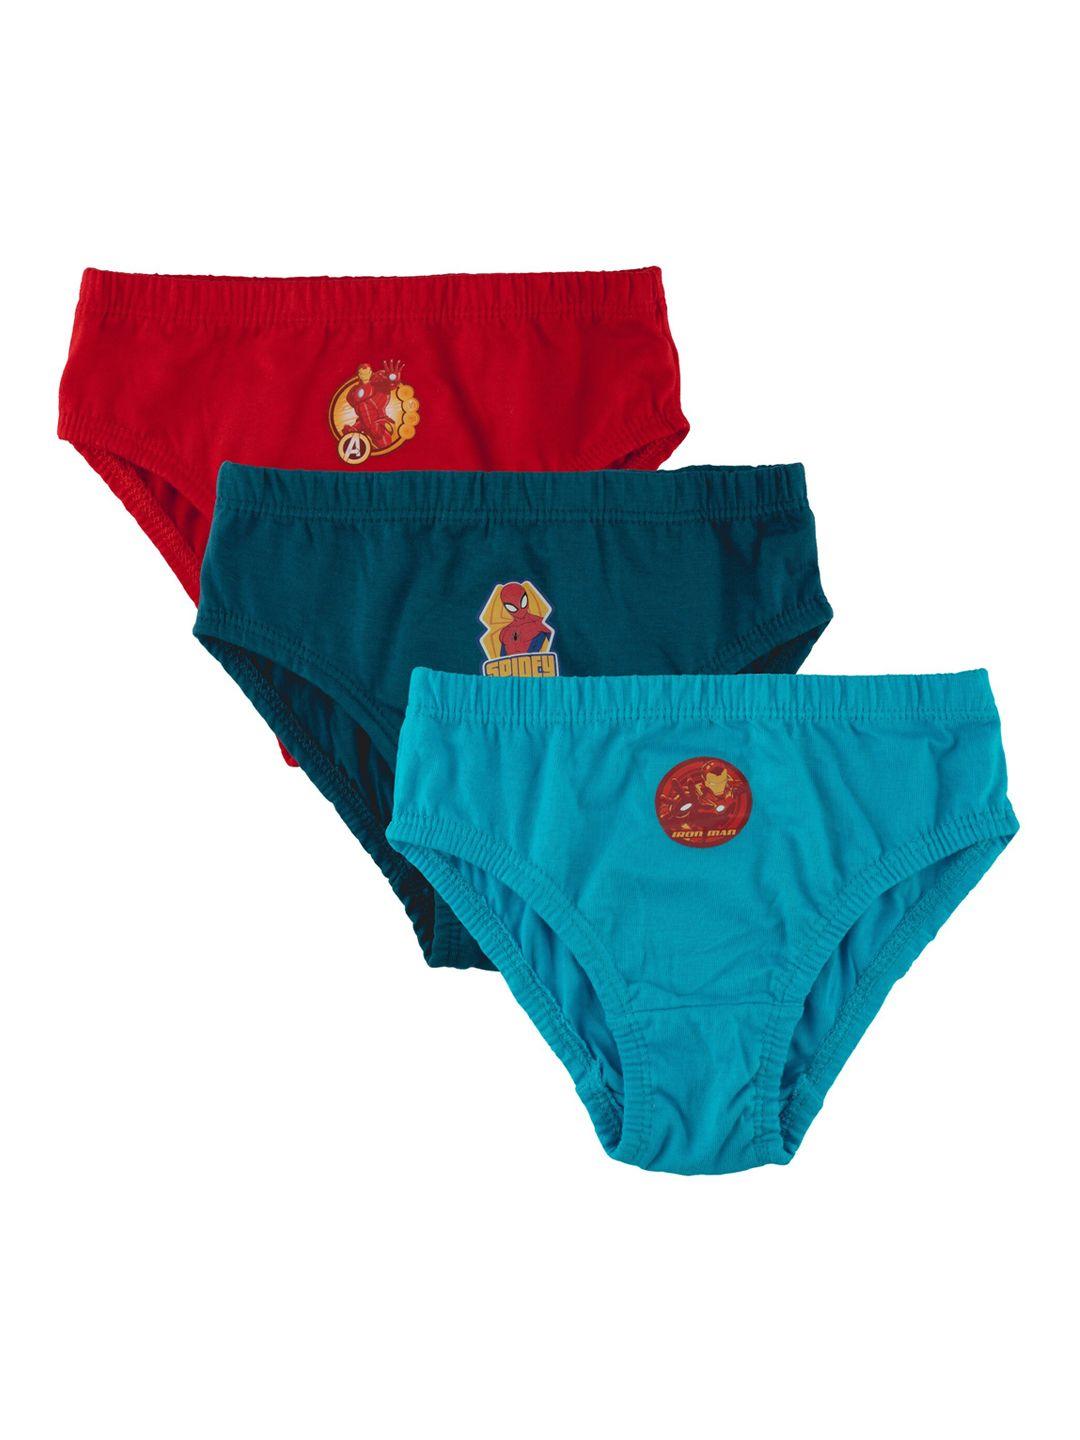 nuluv boys pack of 3 assorted pure cotton basic briefs